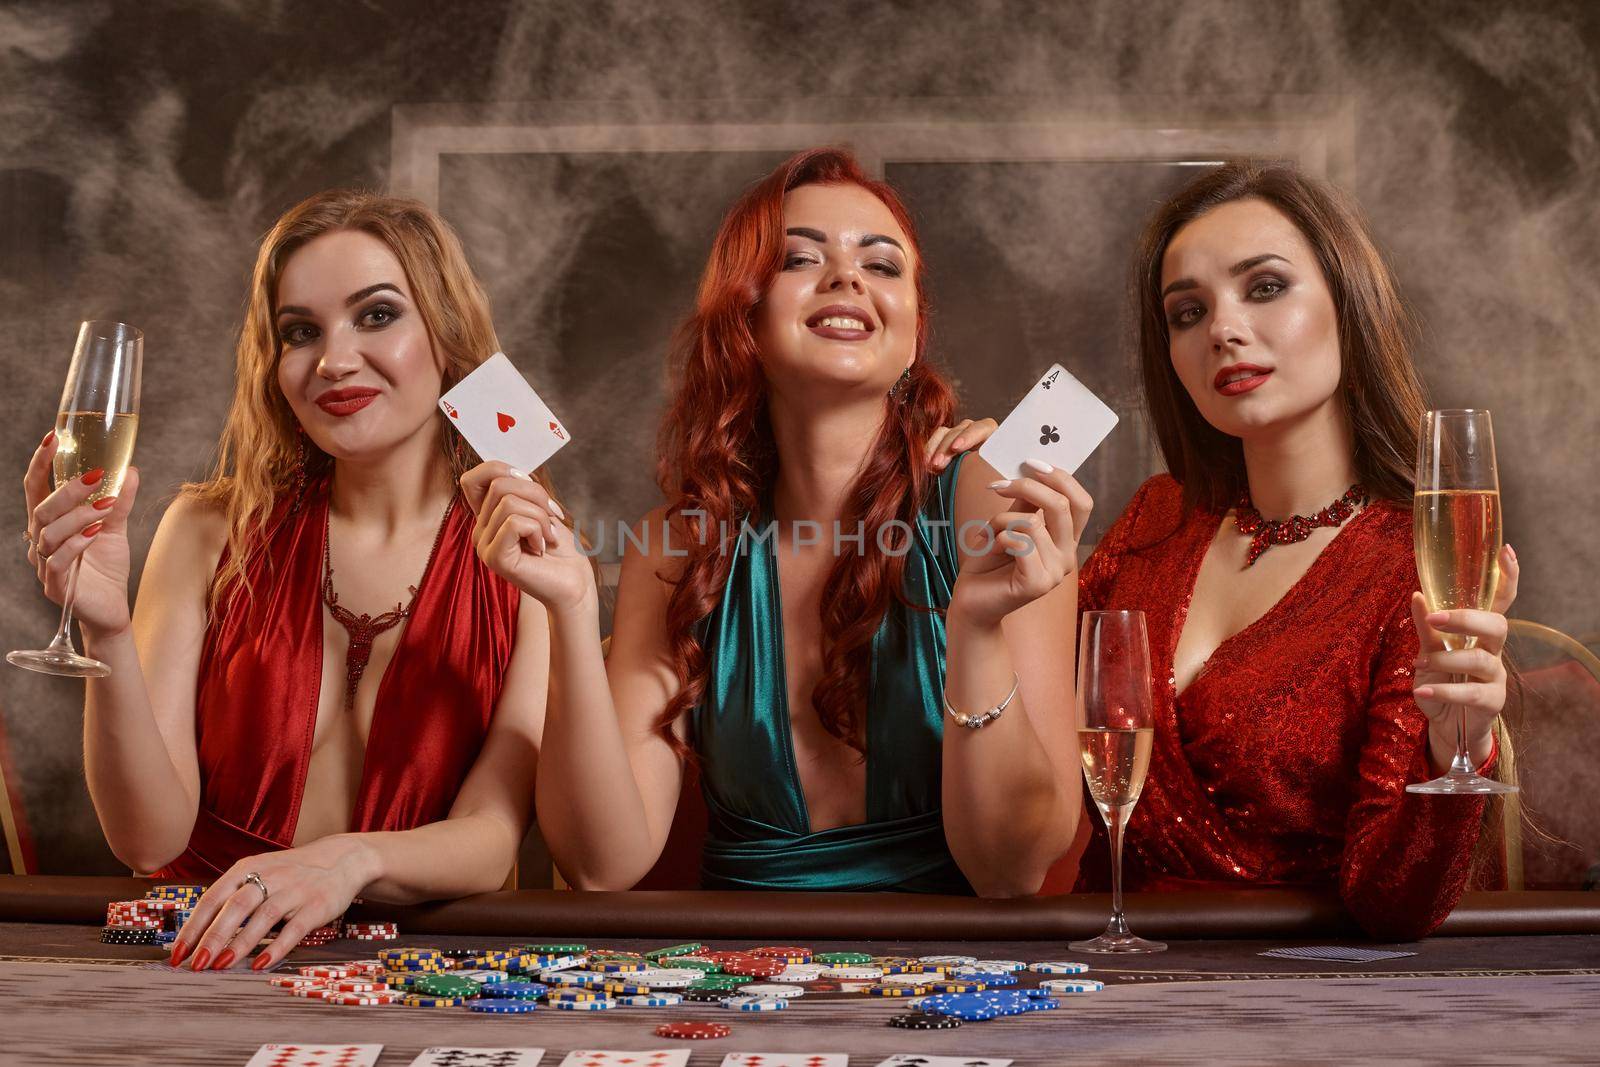 Pretty ladies are playing poker at casino. They are celebrating their win, smiling, looking at the camera and posing at the table against a a dark smoke background. Cards, chips, money, alcohol, gambling, entertainment concept.